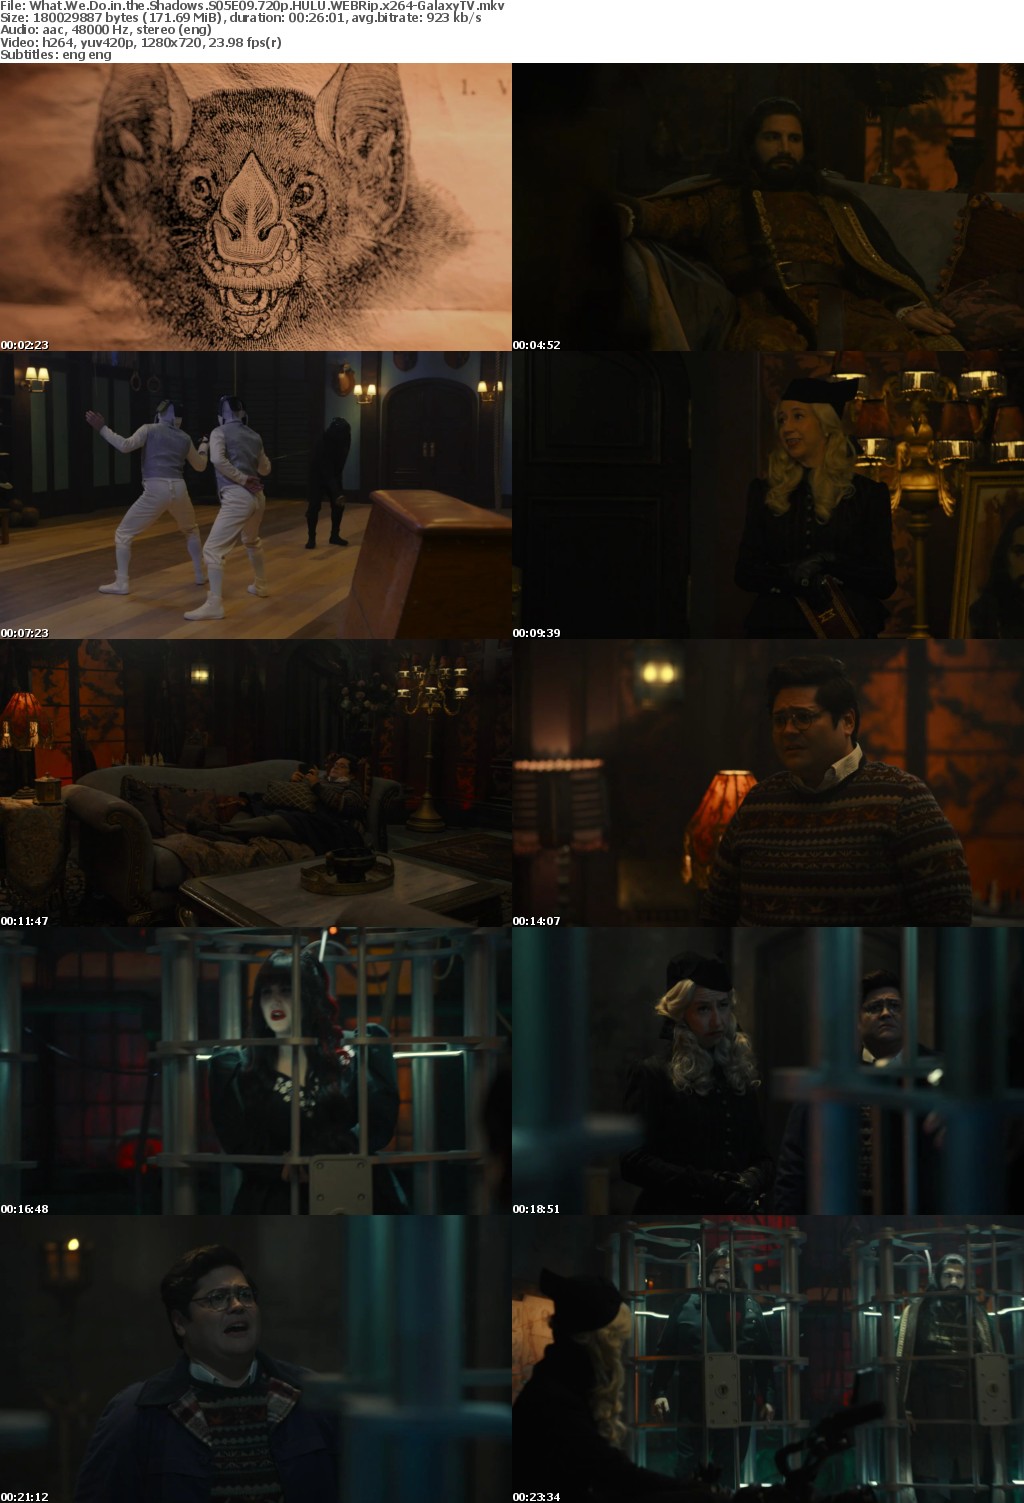 What We Do in the Shadows S05 COMPLETE 720p HULU WEBRip x264-GalaxyTV